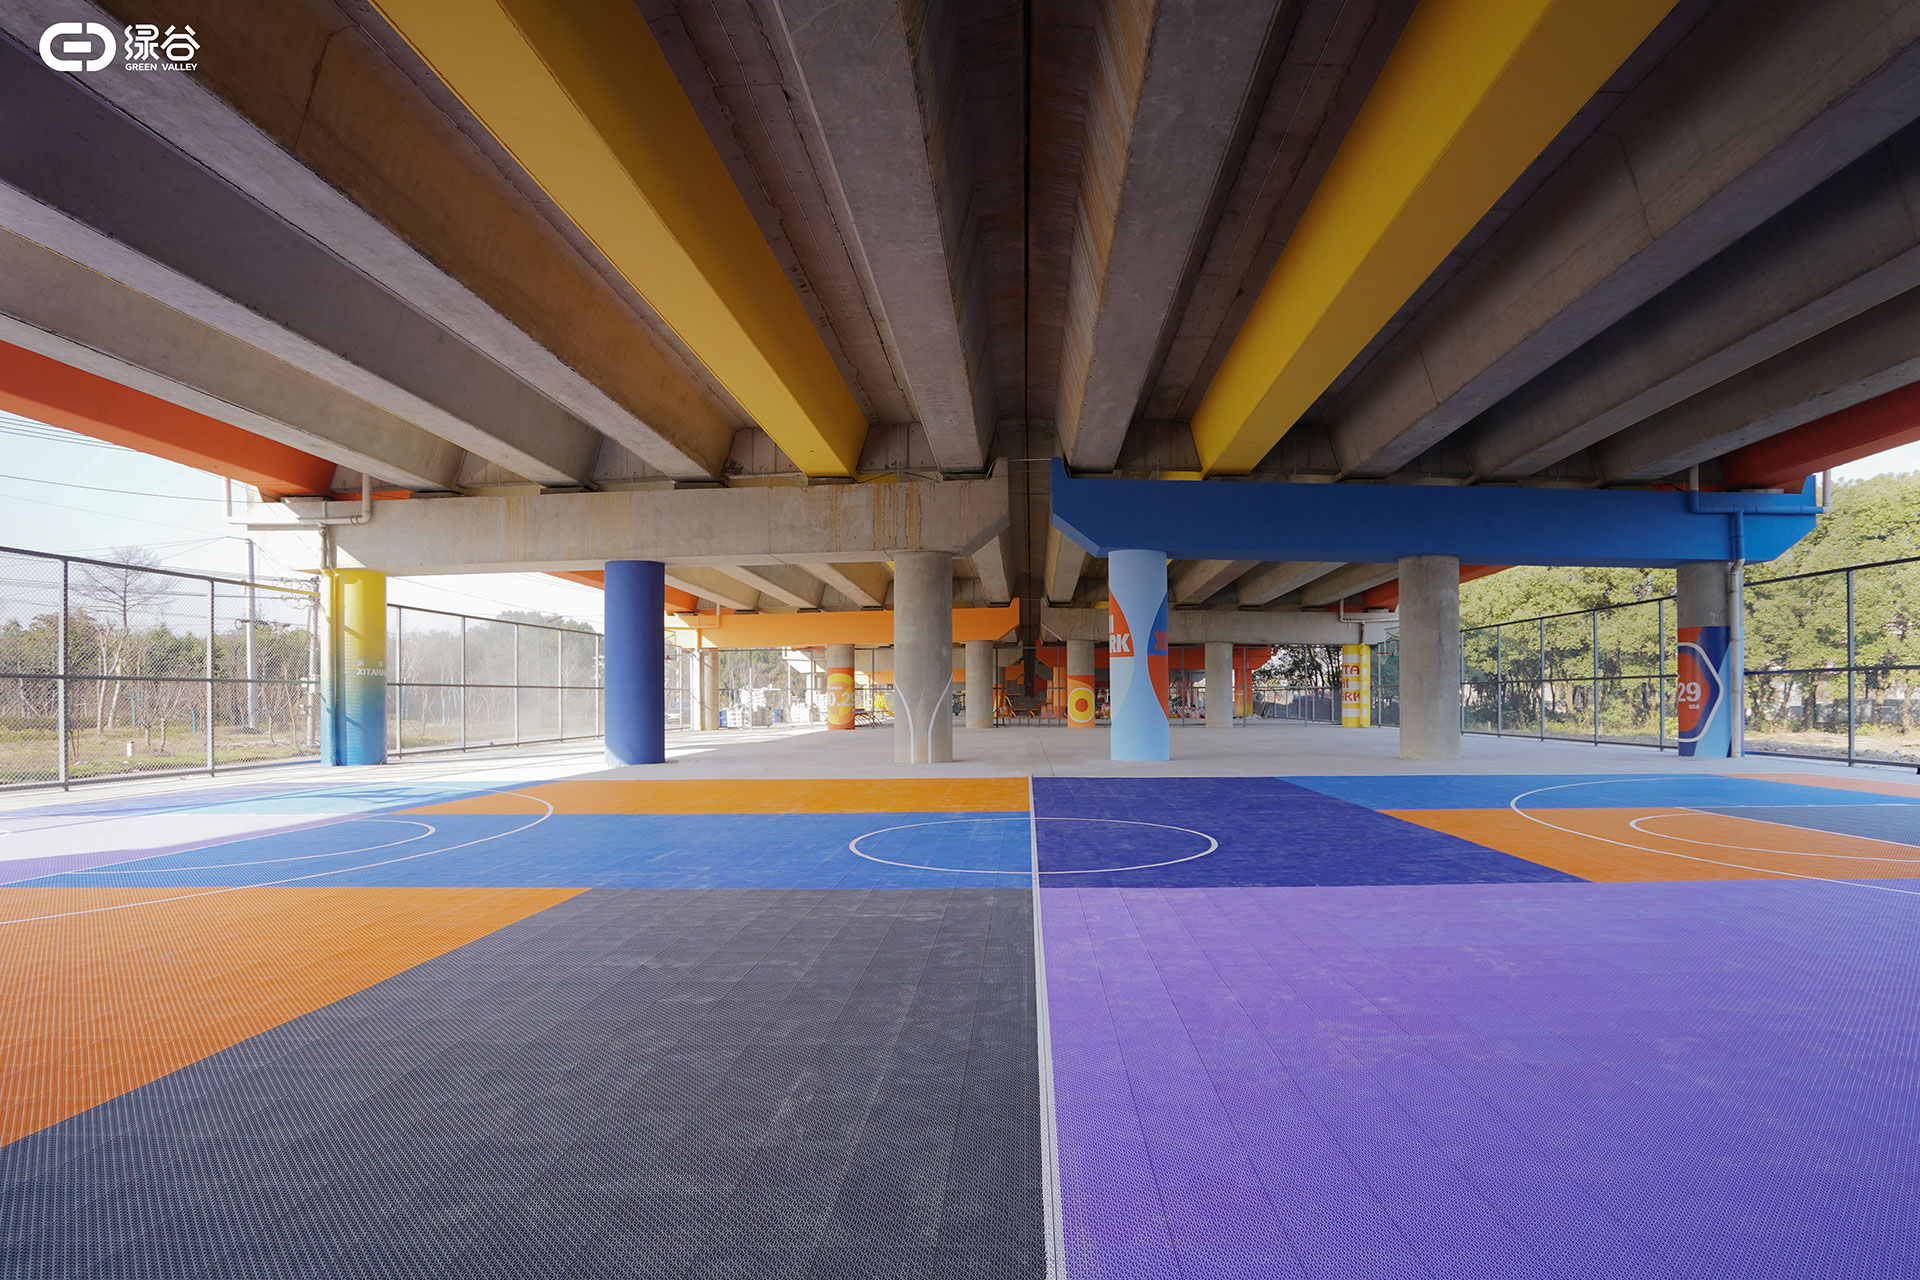 More fun and more exciting! Internet celebrity creative sports space under Overpass